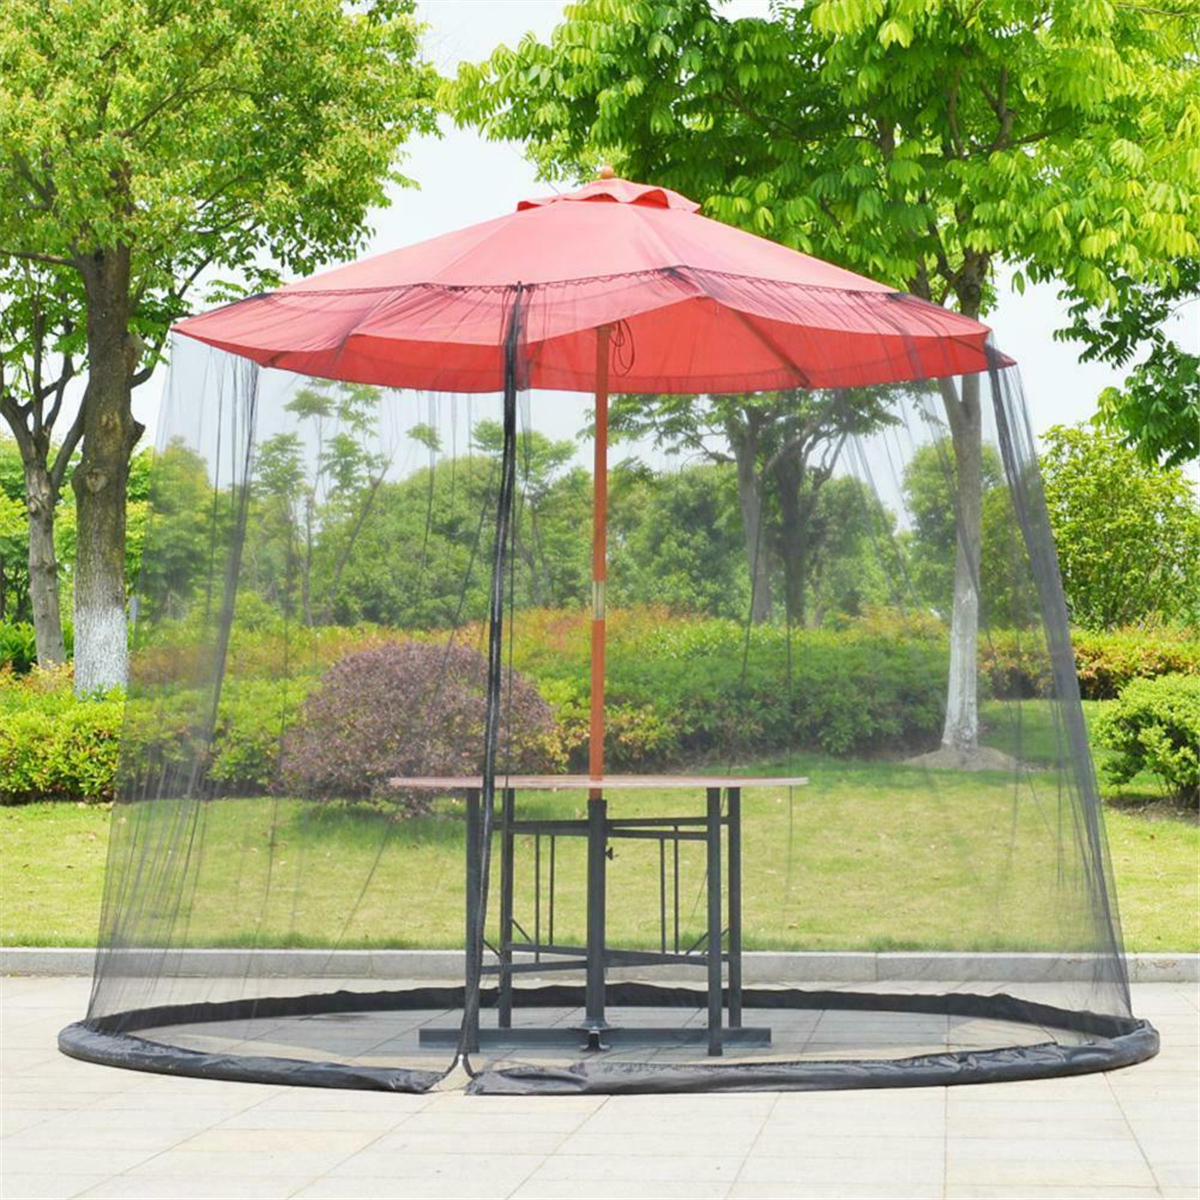 300x230cm Universal Umbrella Table Screen Cover Mosquito Bug Insect Net Outdoor Patio Sunshade Gauze Netting